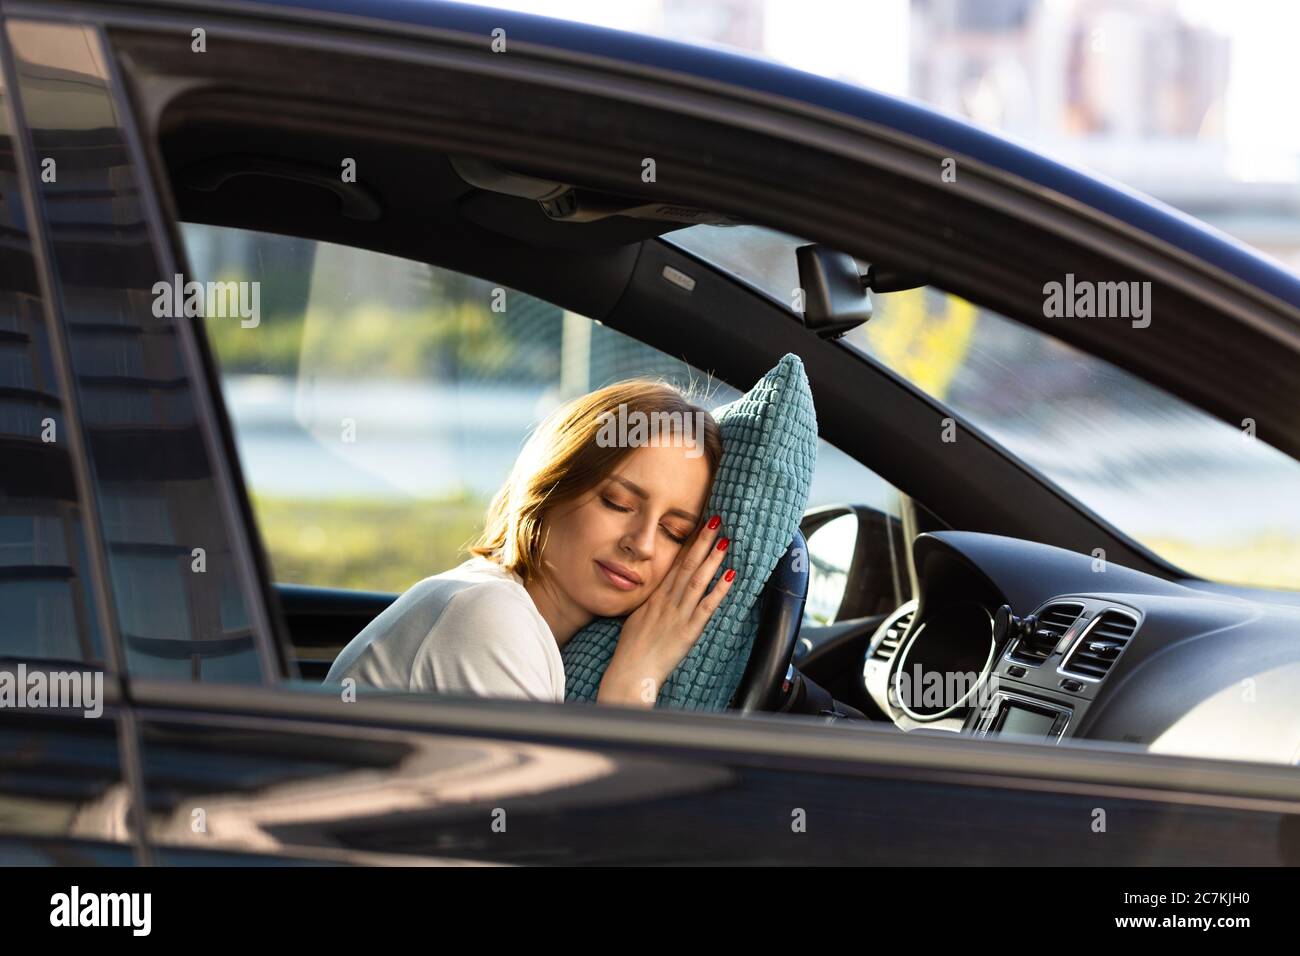 Tired young woman asleep on pillow on steering wheel, resting after long hours driving a car. Fatigue. Sleep deprivation. Stock Photo